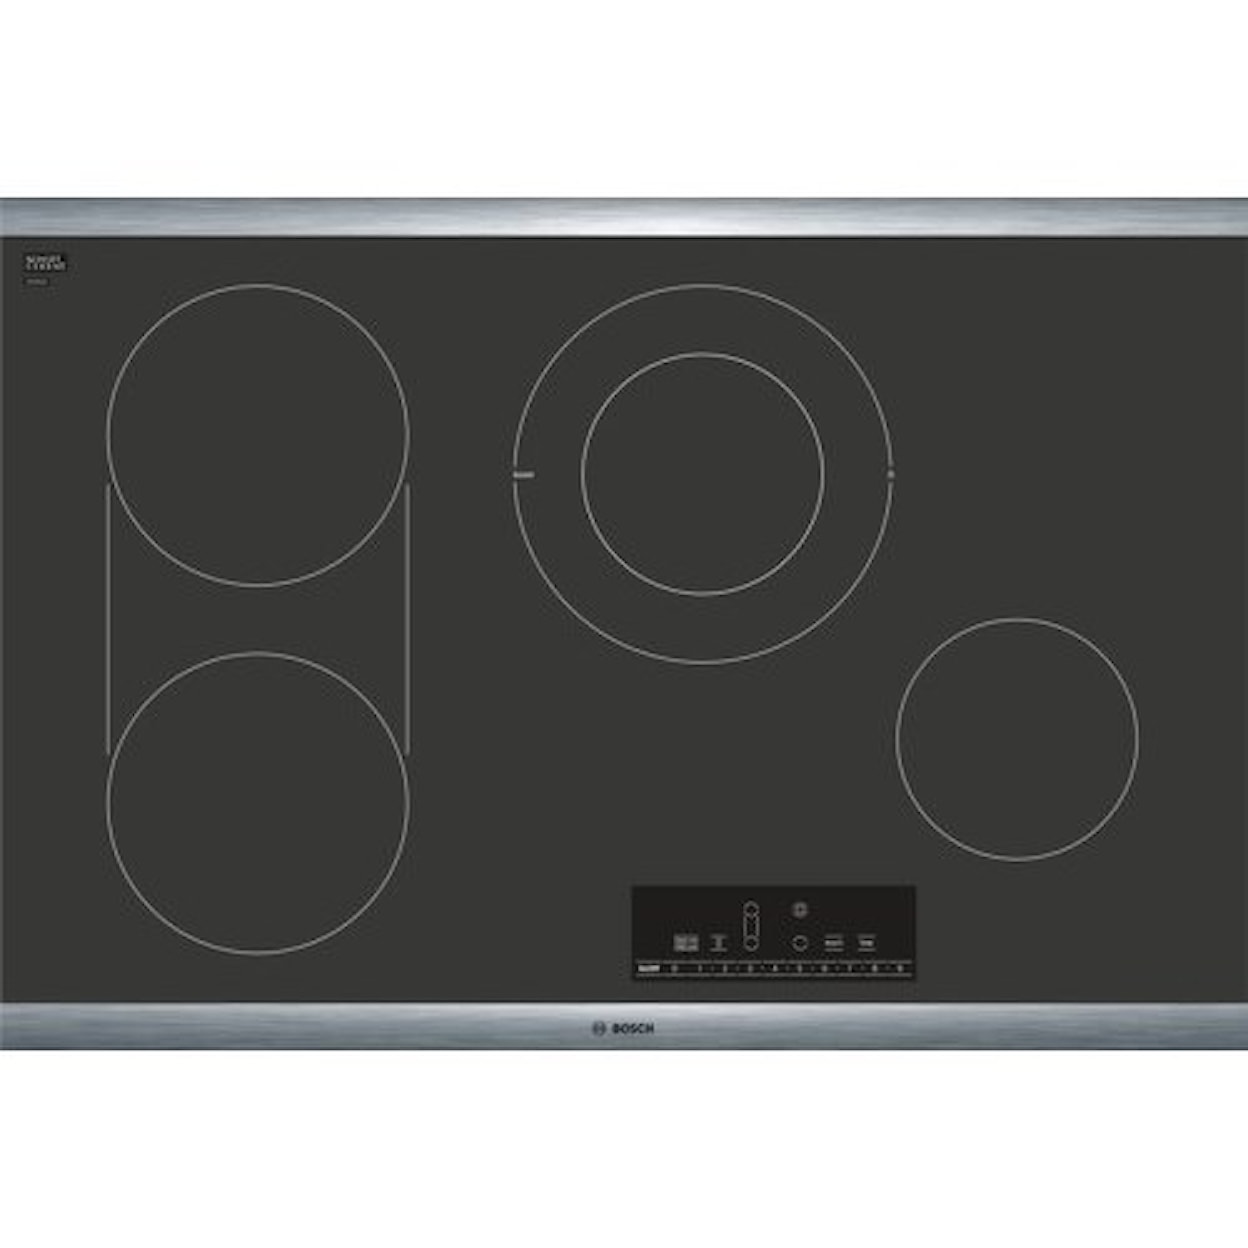 Bosch Electric Cooktops 30" Electric Cooktop - 800 Series